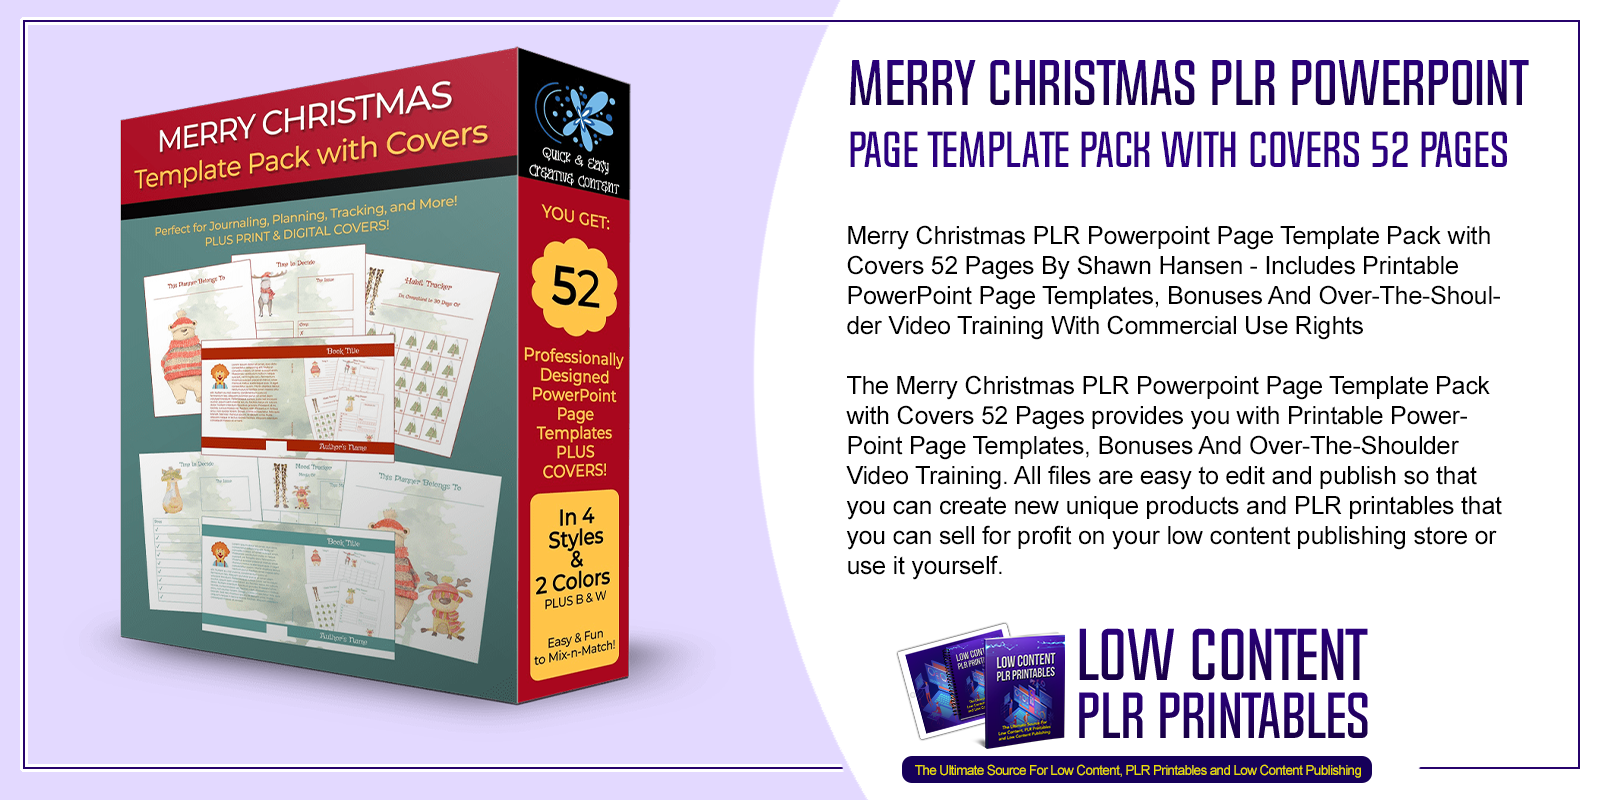 Merry Christmas PLR Powerpoint Page Template Pack with Covers 52 Pages